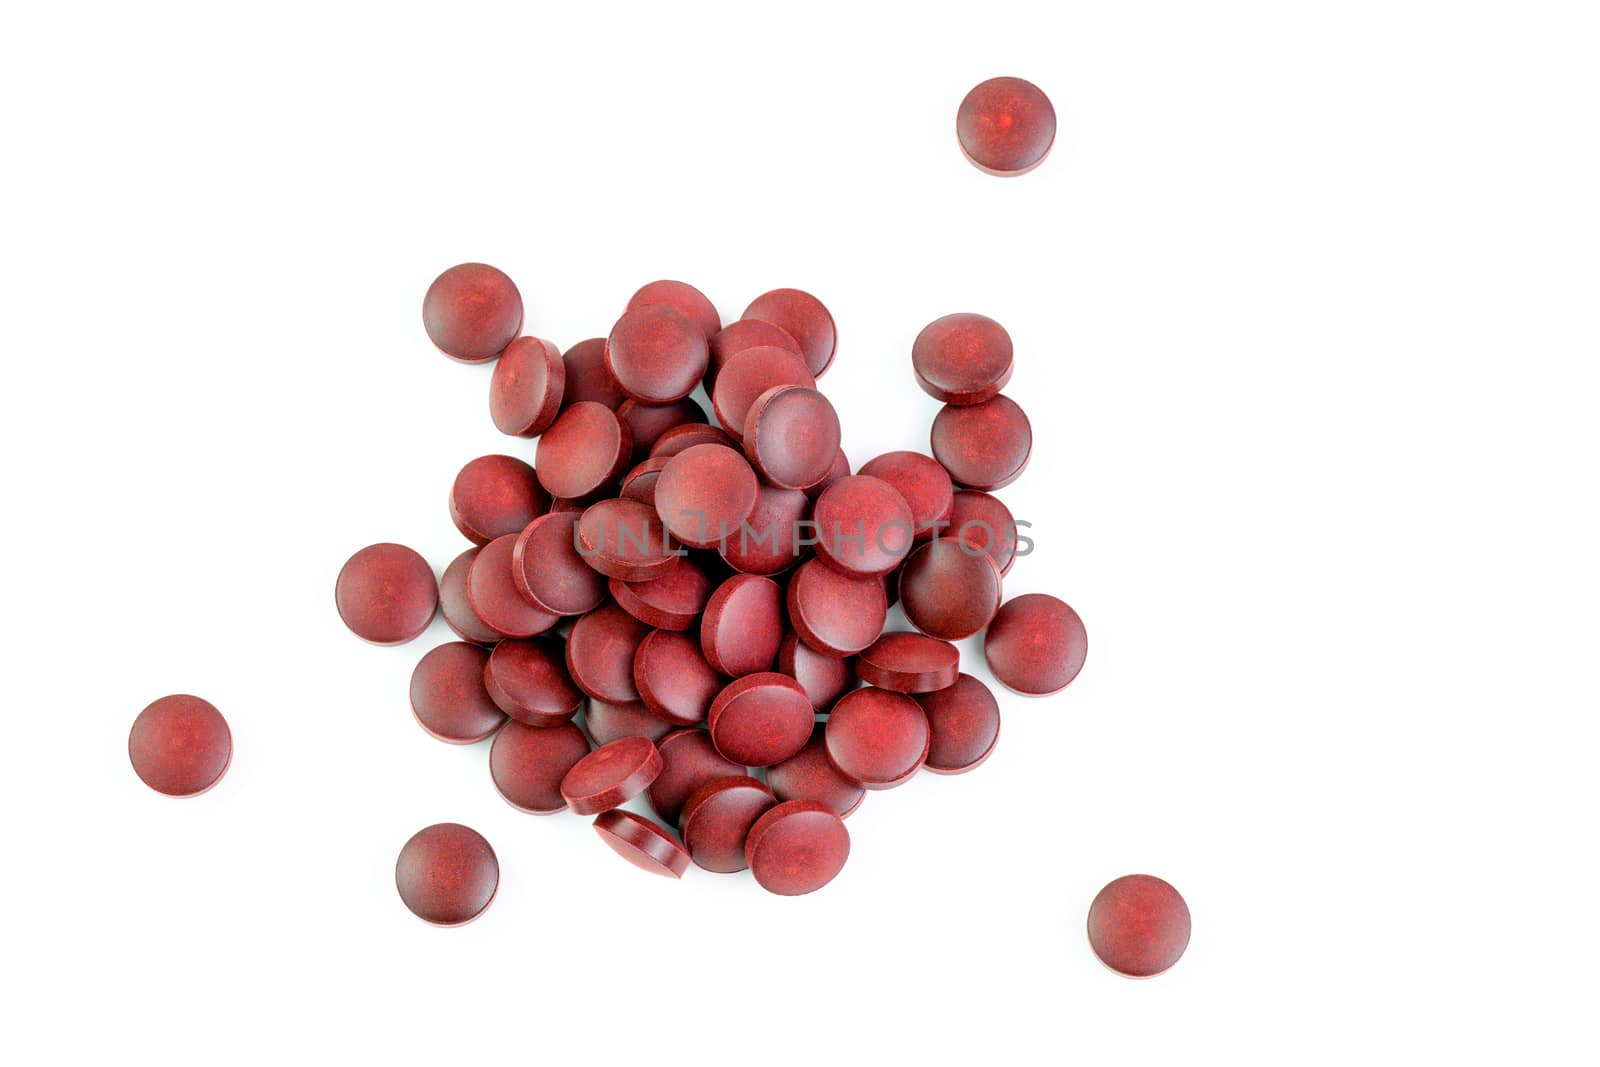 a small pile of red compacted powder pills isolated on white background in linear perspective by z1b